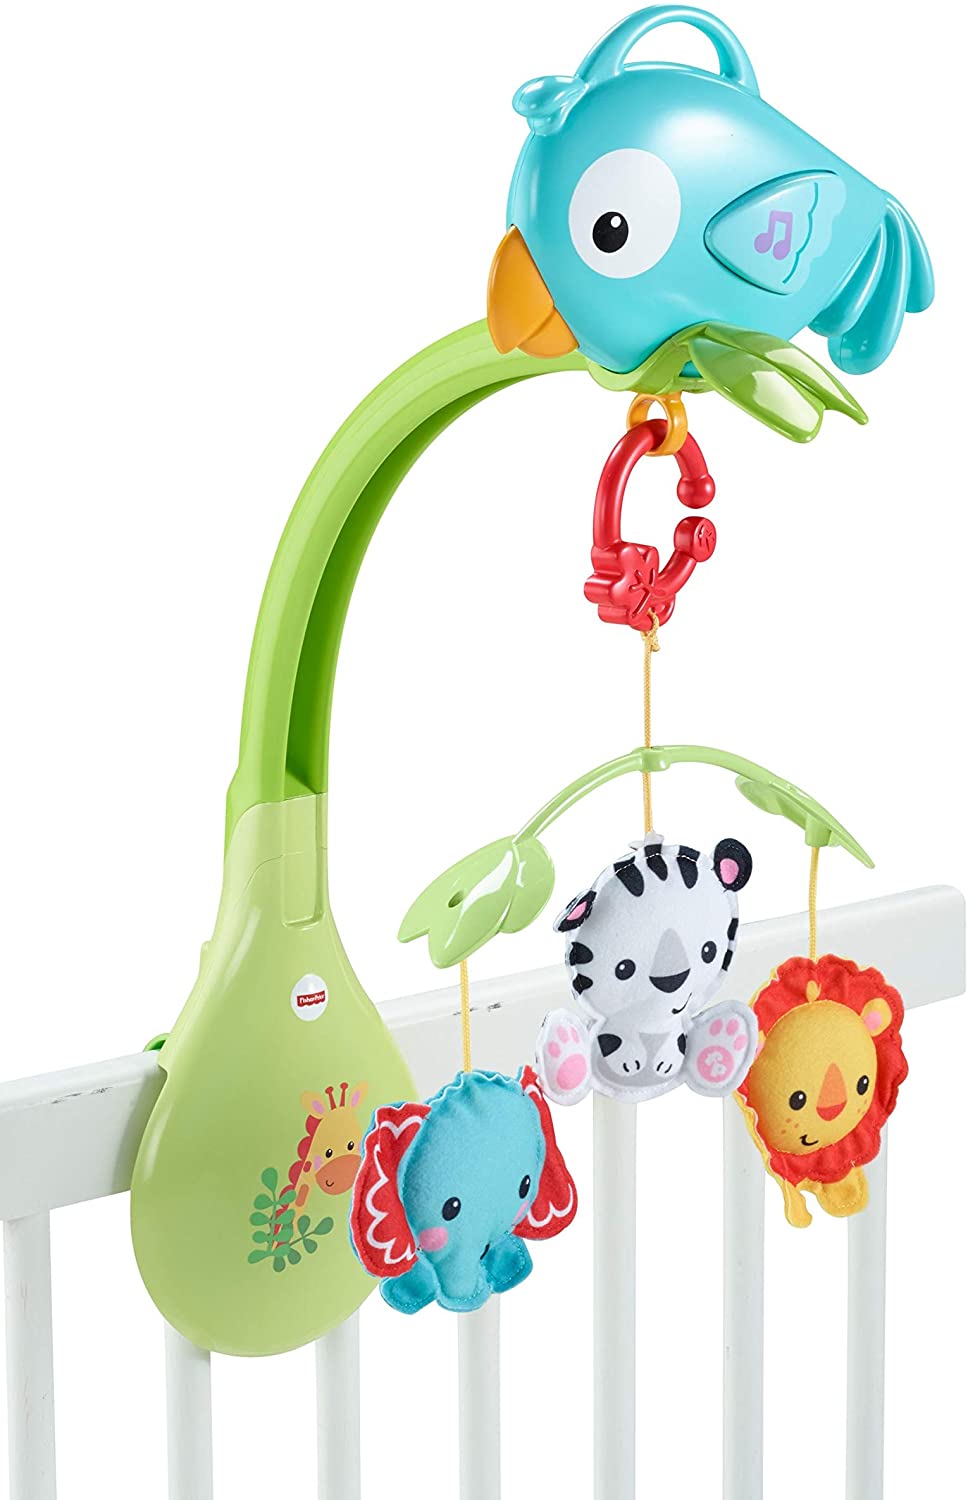 Fisher Price 3 in 1 Rainforest Friends Musical Mobile